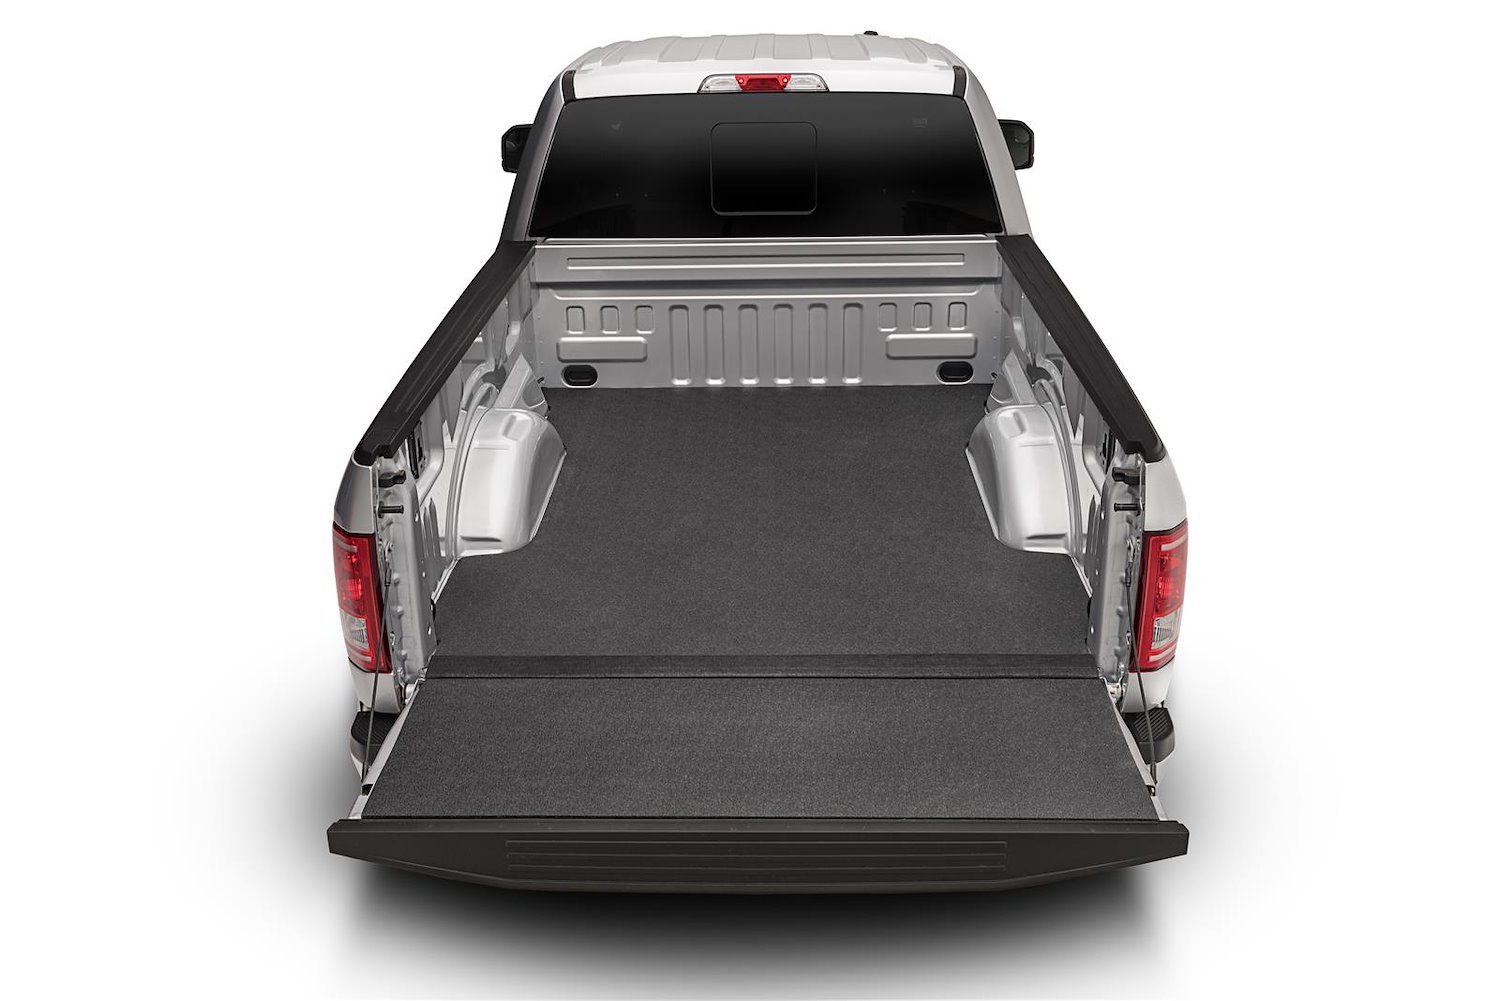 IMC07CCS IMPACT MAT FOR SPRAY-IN OR NO BED LINER 07-18 GM SILVERADO/SIERRA 5'8" BED